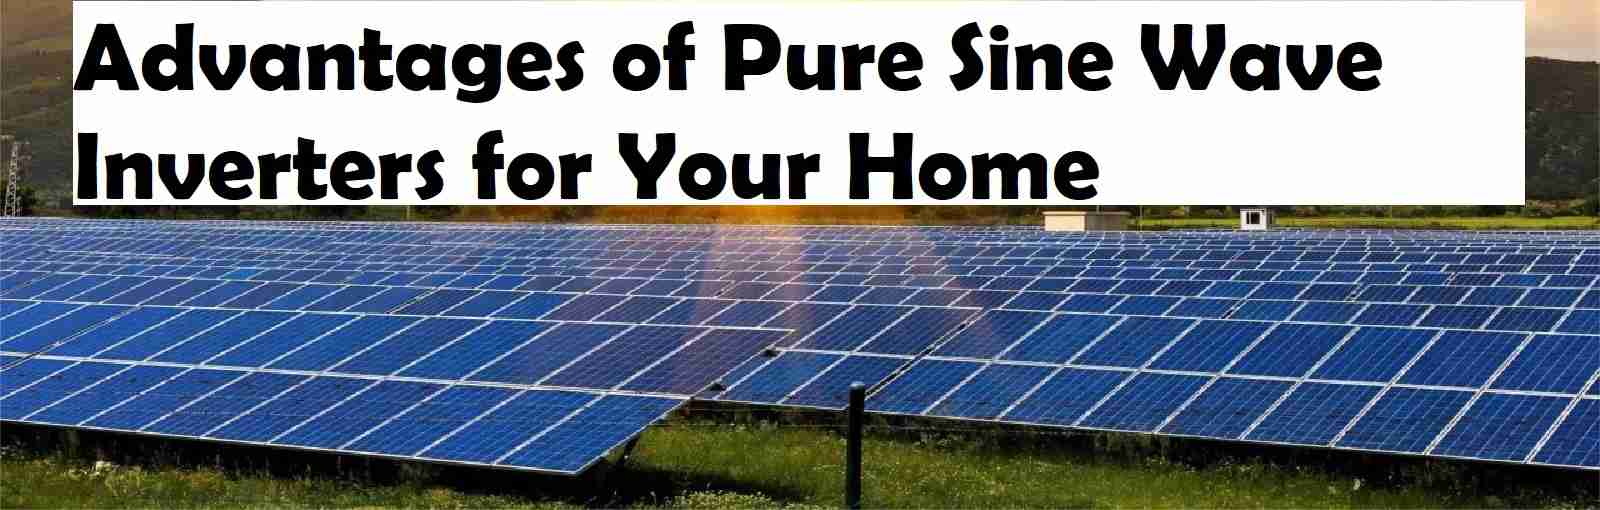 Advantages of Pure Sine Wave Inverters for Your Home